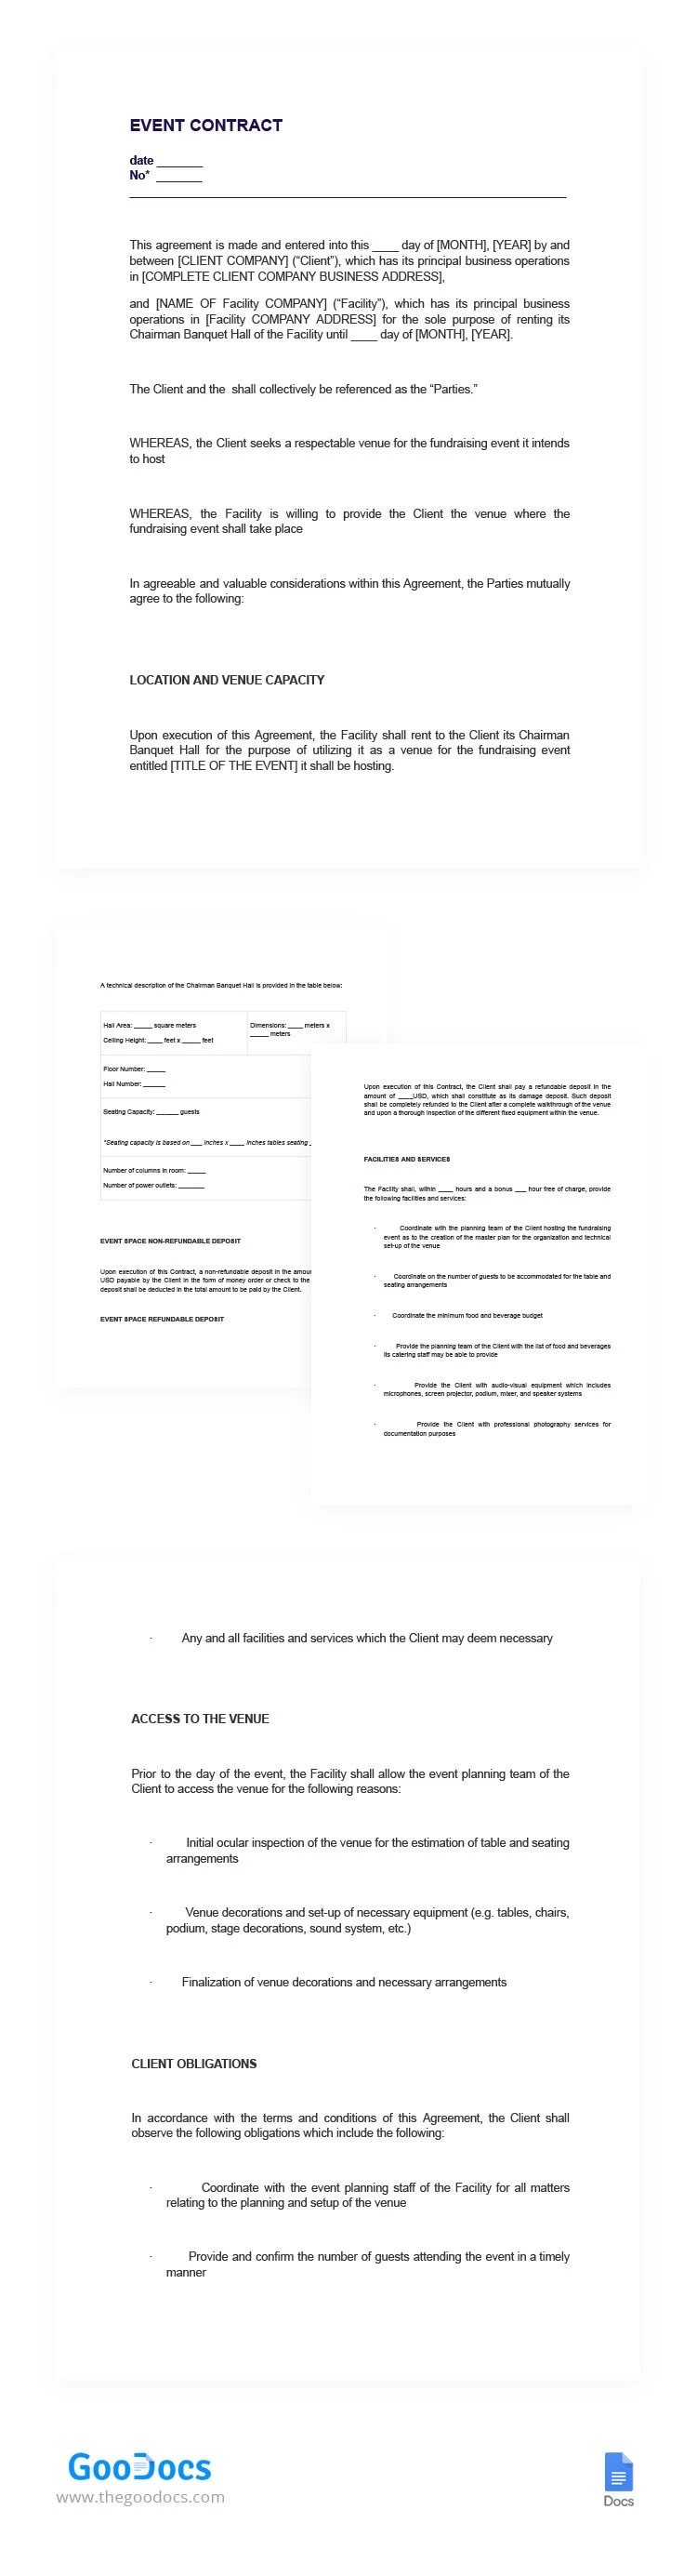 Professional Еvent Contract - free Google Docs Template - 10066031